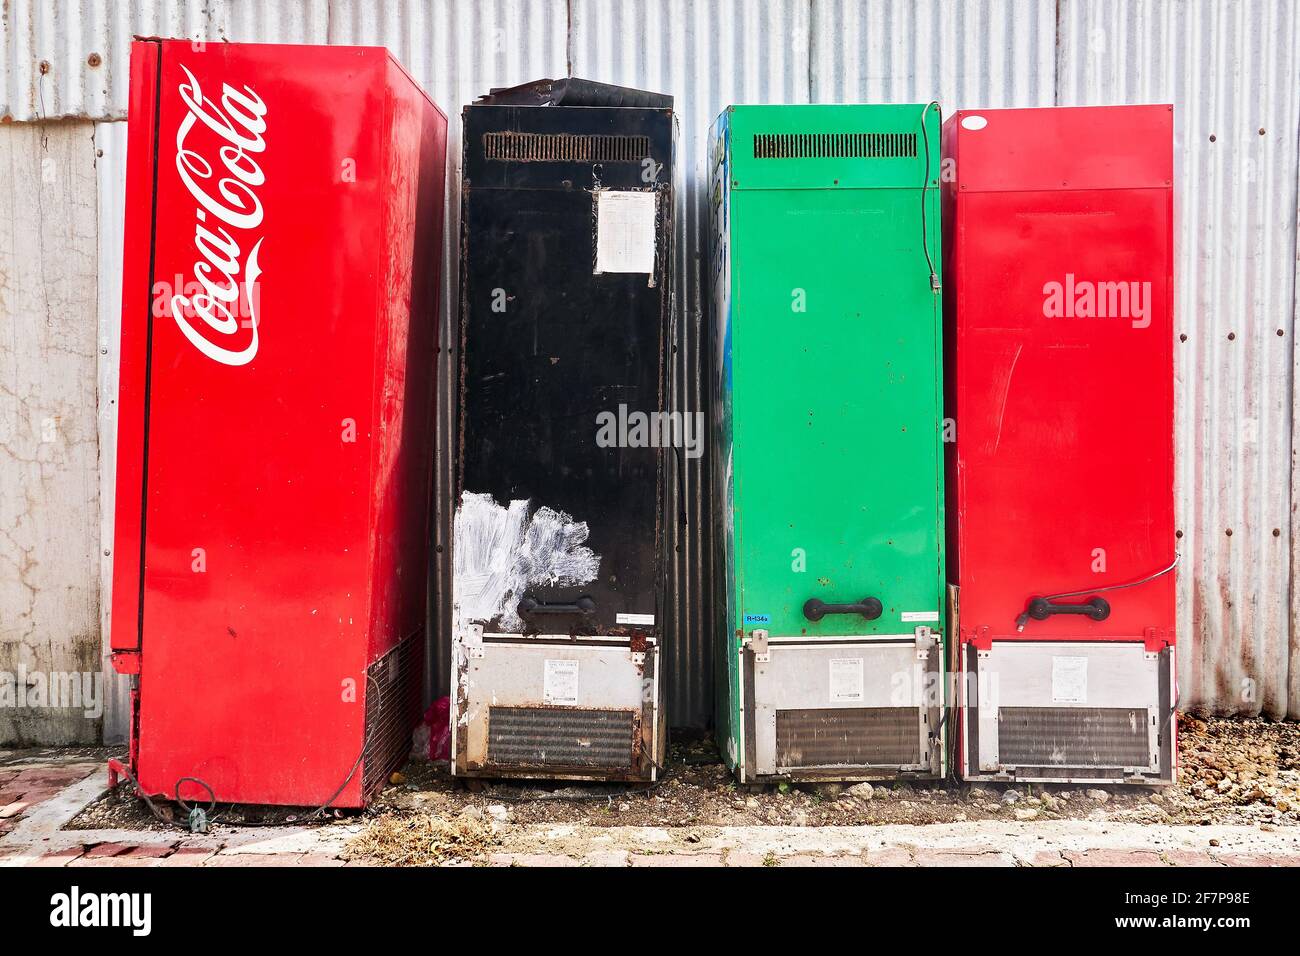 Close-up view of multicolored old and rusty refrigerators placed in a row next to a corrugated metal wall, seen along a road in the Philippines, Asia Stock Photo